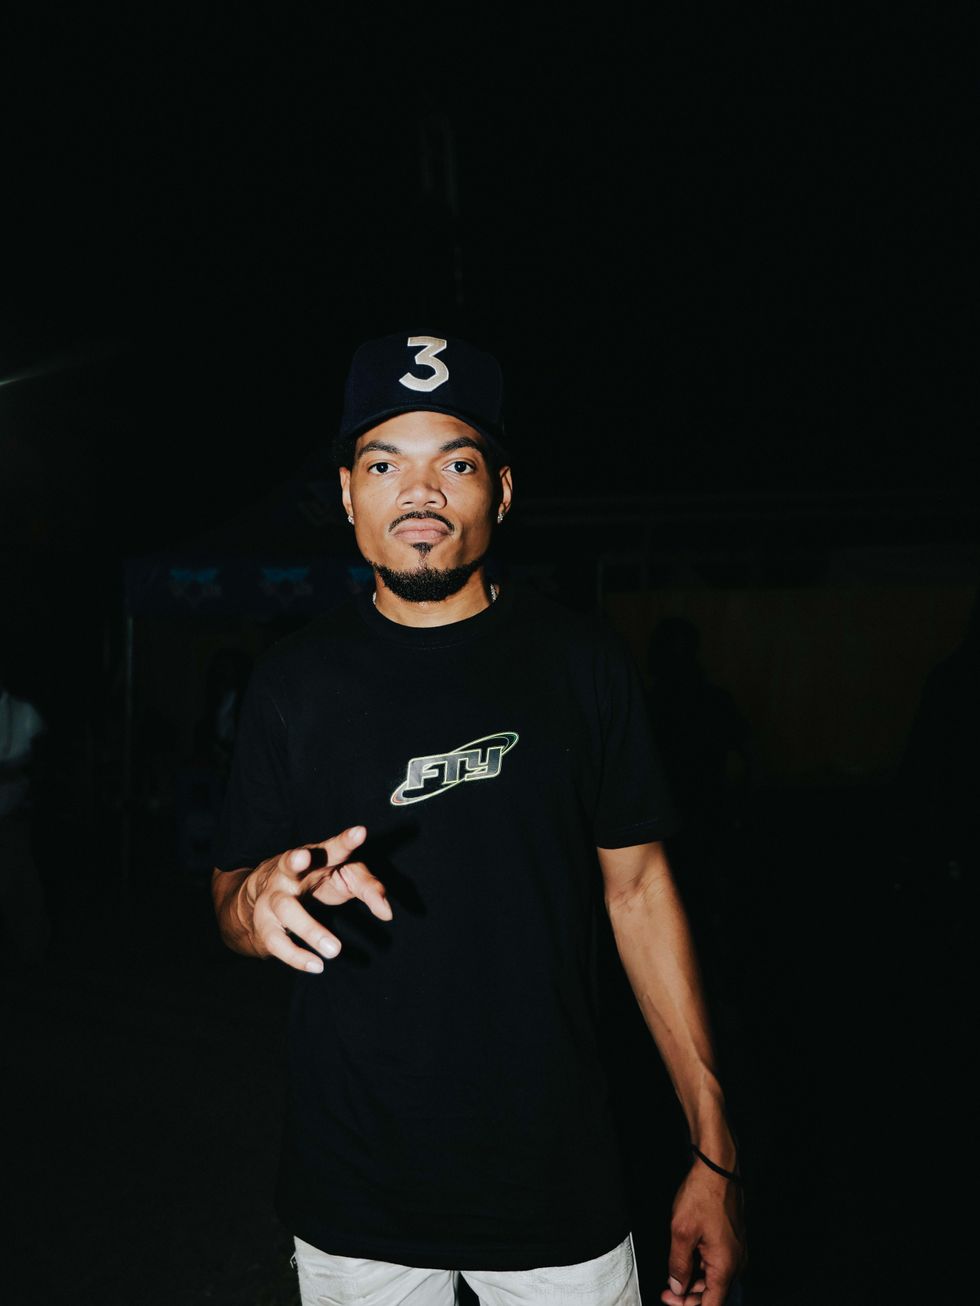 Chance the Rapper with 3 Hat